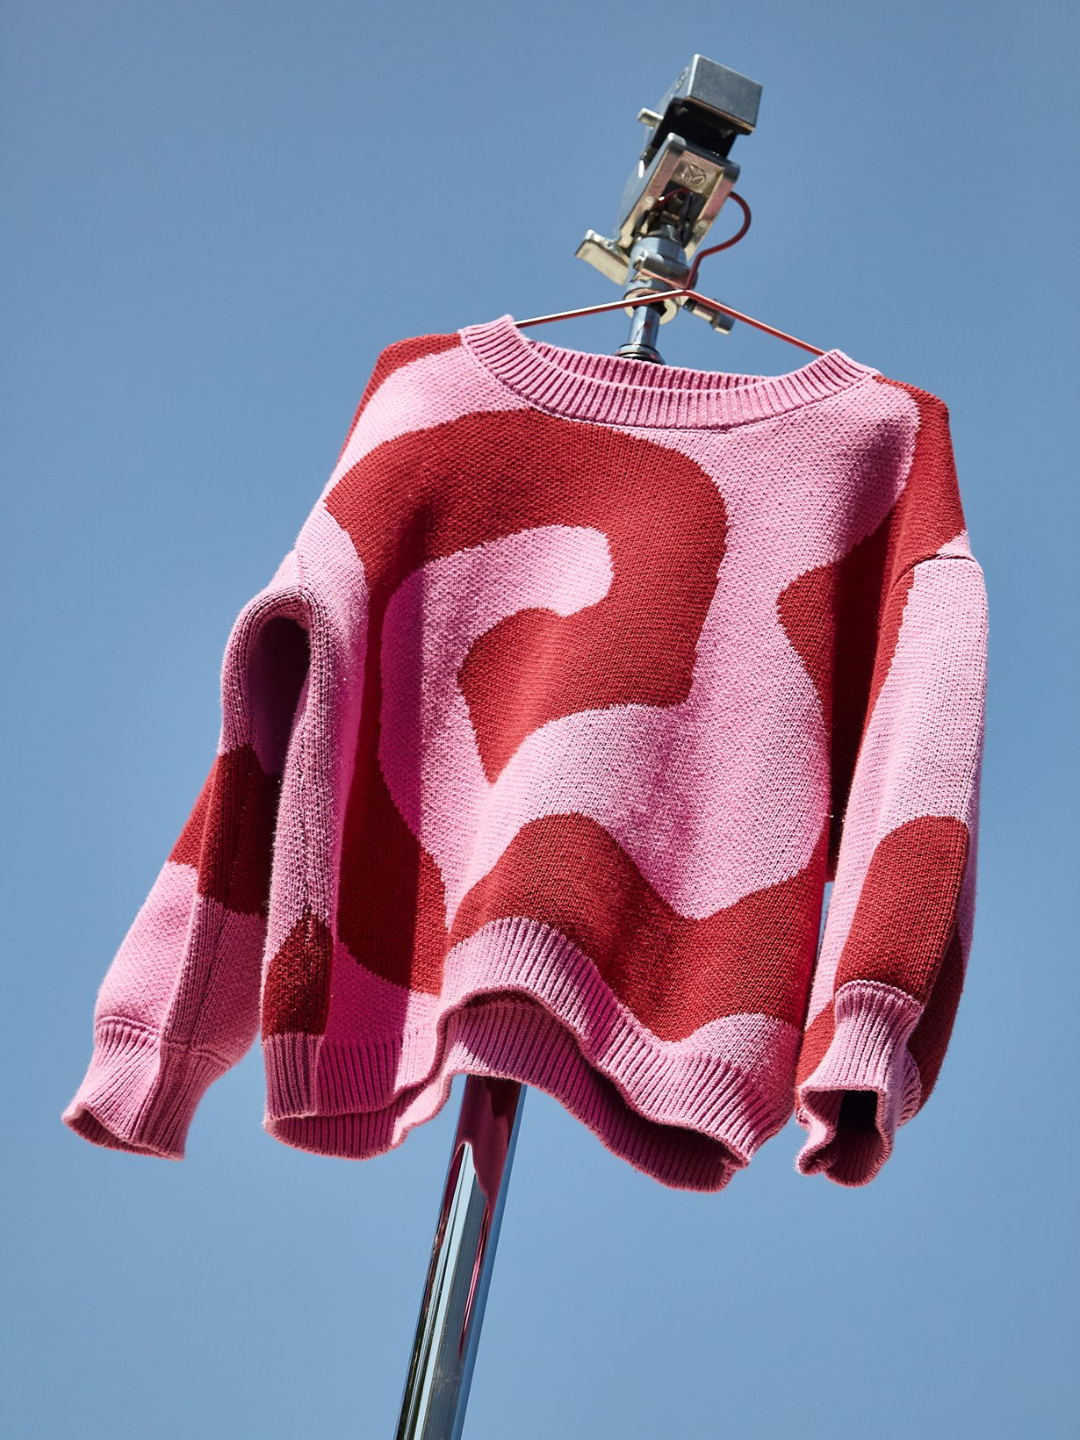 Raspberry | Front view of kids crewneck sweater in bright pink, with a large single red swirl design that covers the entire sweater. The sweater is shown on a hanger, hanging from a metal photography stand, against a blue sky.